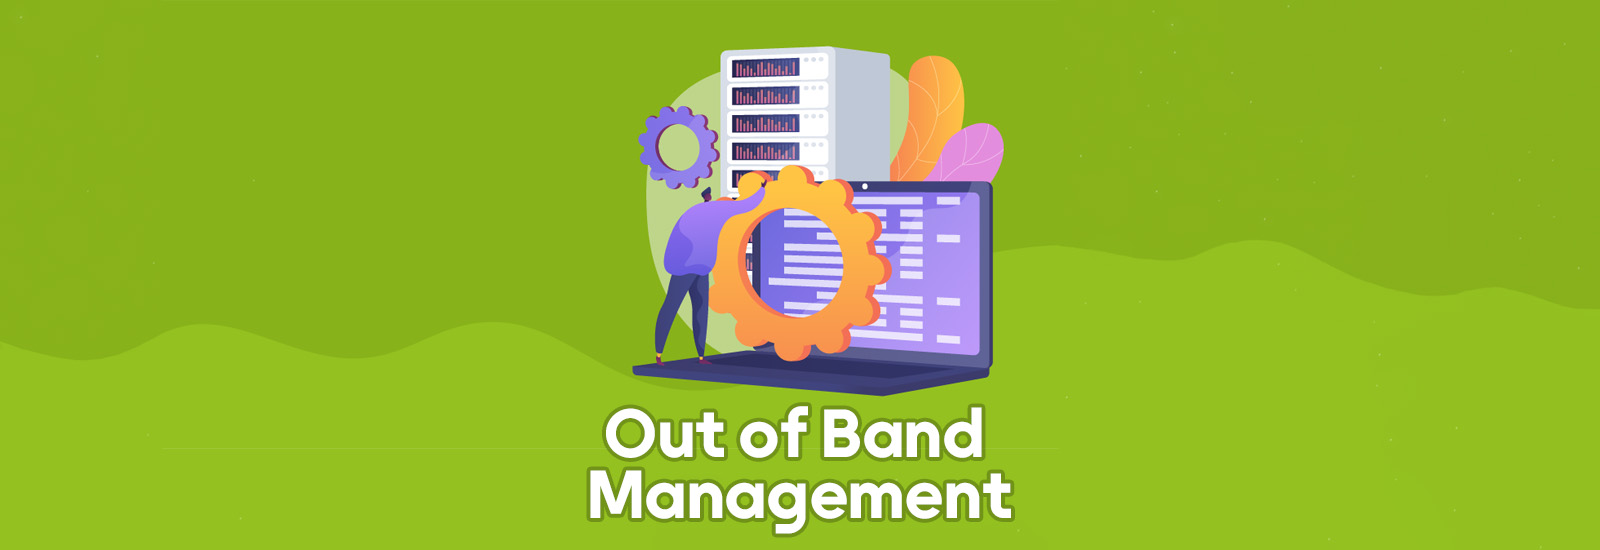 Out of Band management